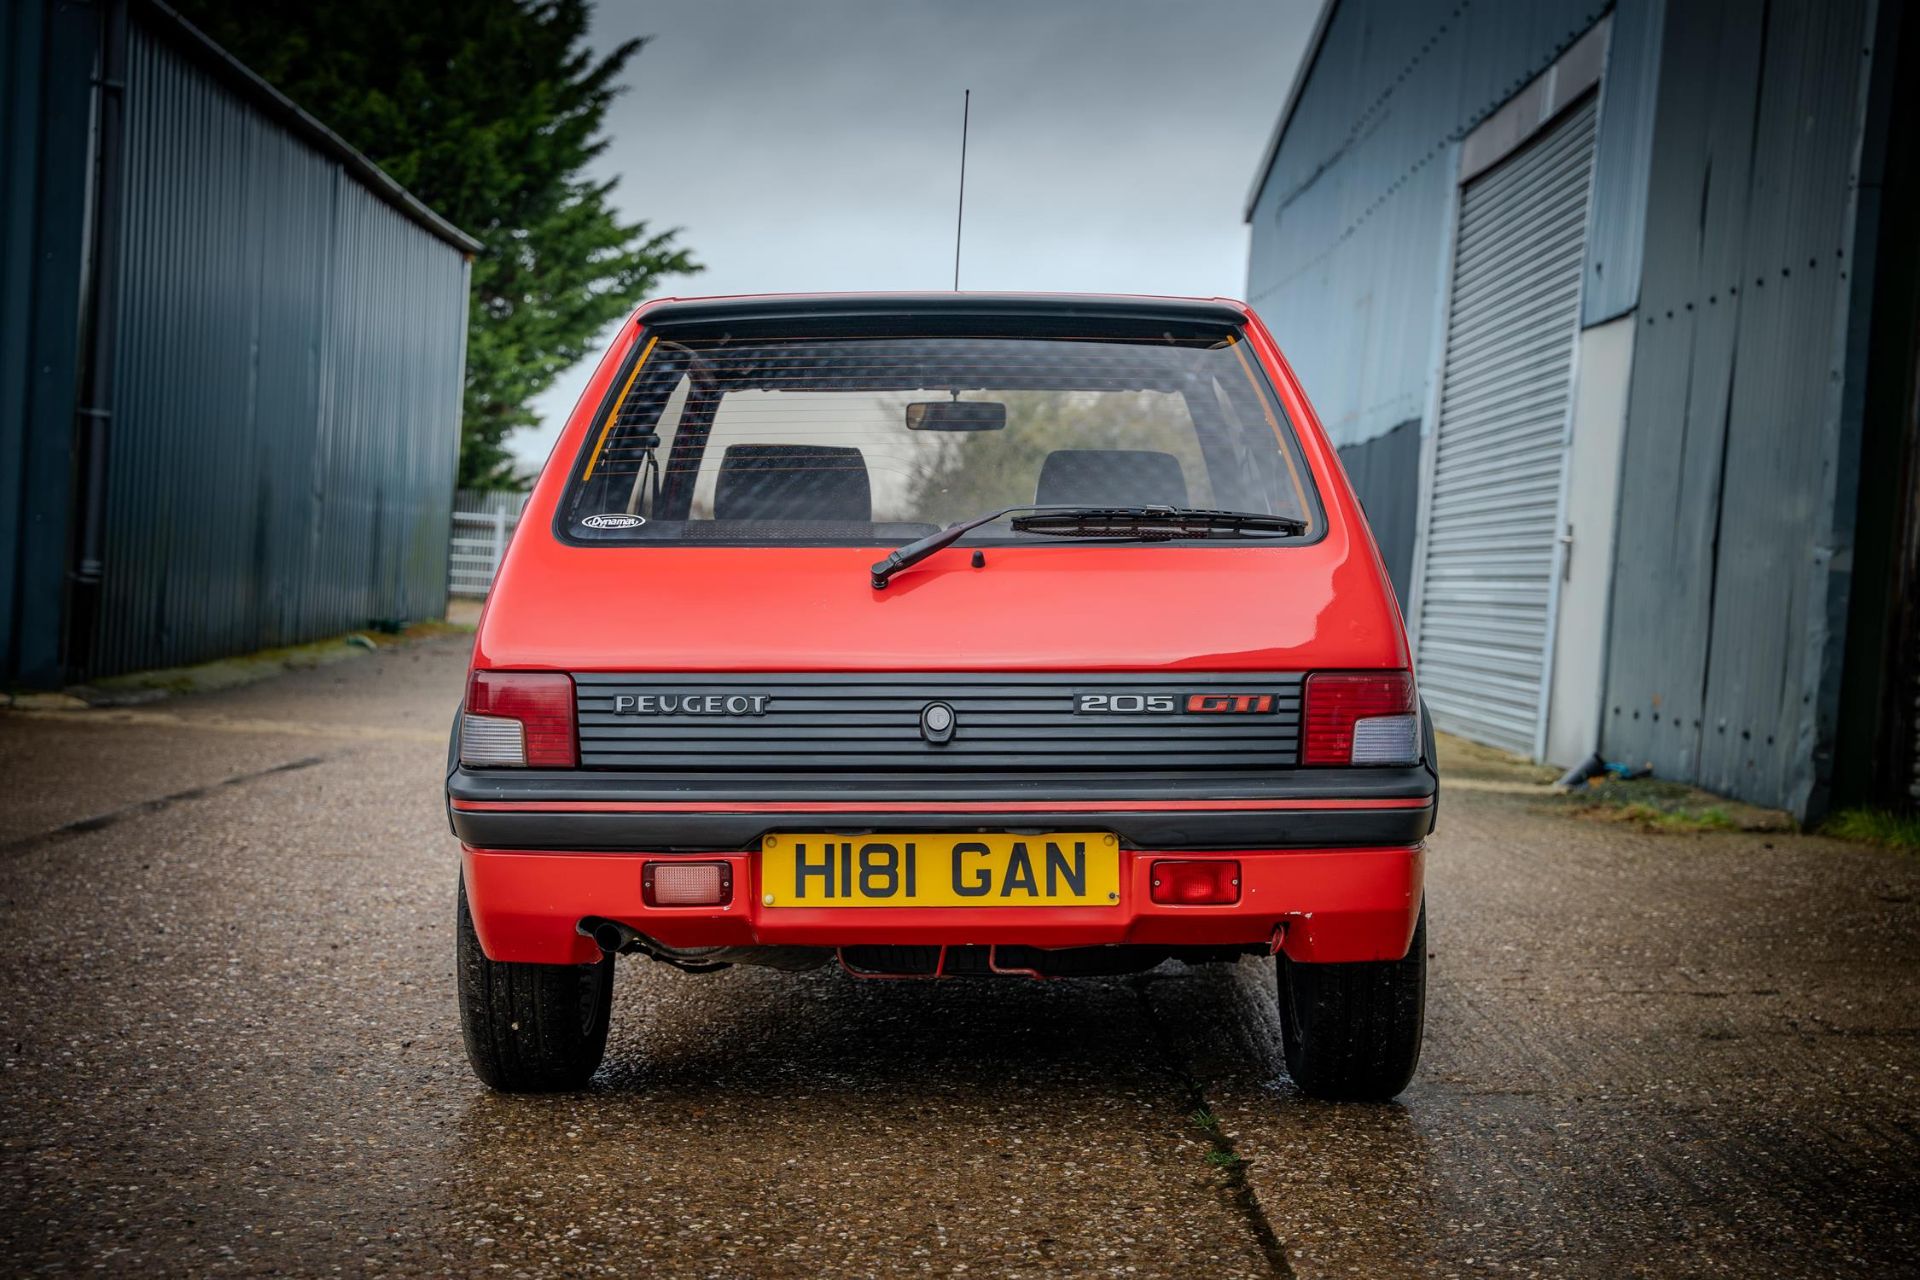 1990 Peugeot 205 GTi 1.6 (Phase 2) - Image 7 of 10